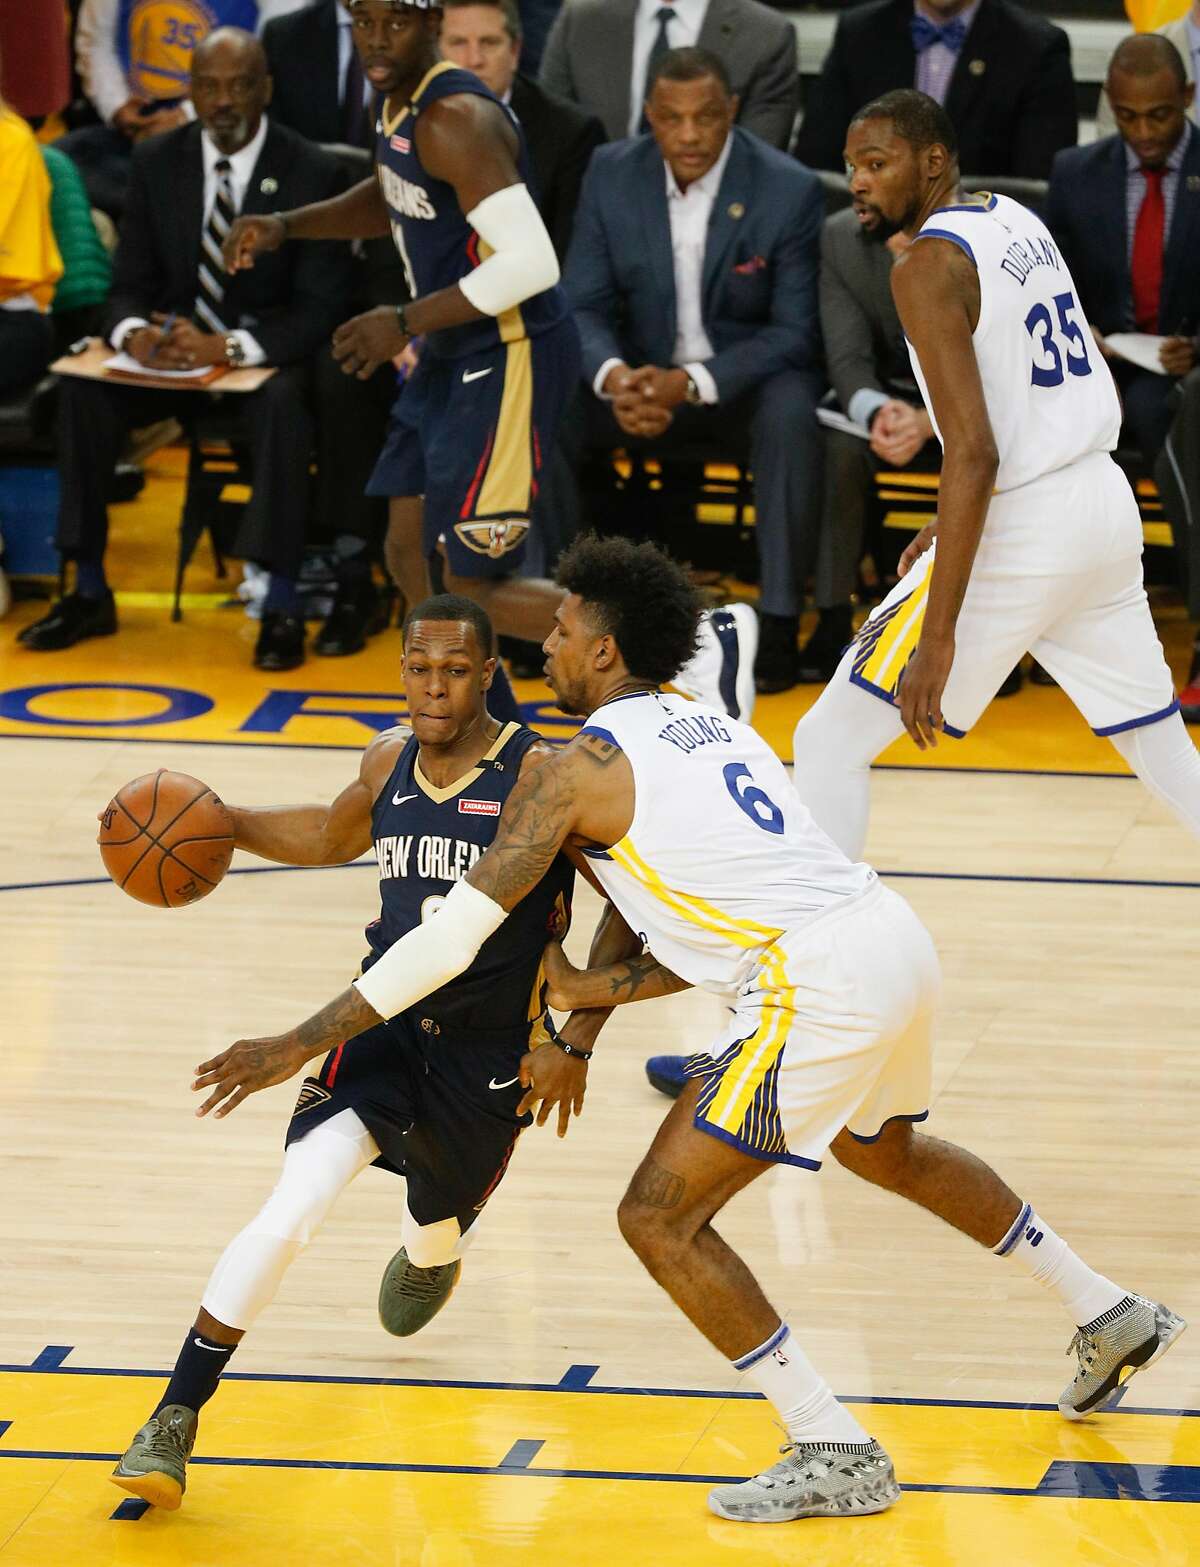 New Orleans Pelicans' Rajon Rando tries to get past Golden State Warriors' Nick Young in the first quarter during game 1 of round 2 of the Western Conference Finals at Oracle Arena on Saturday, April 28, 2018 in Oakland, Calif.